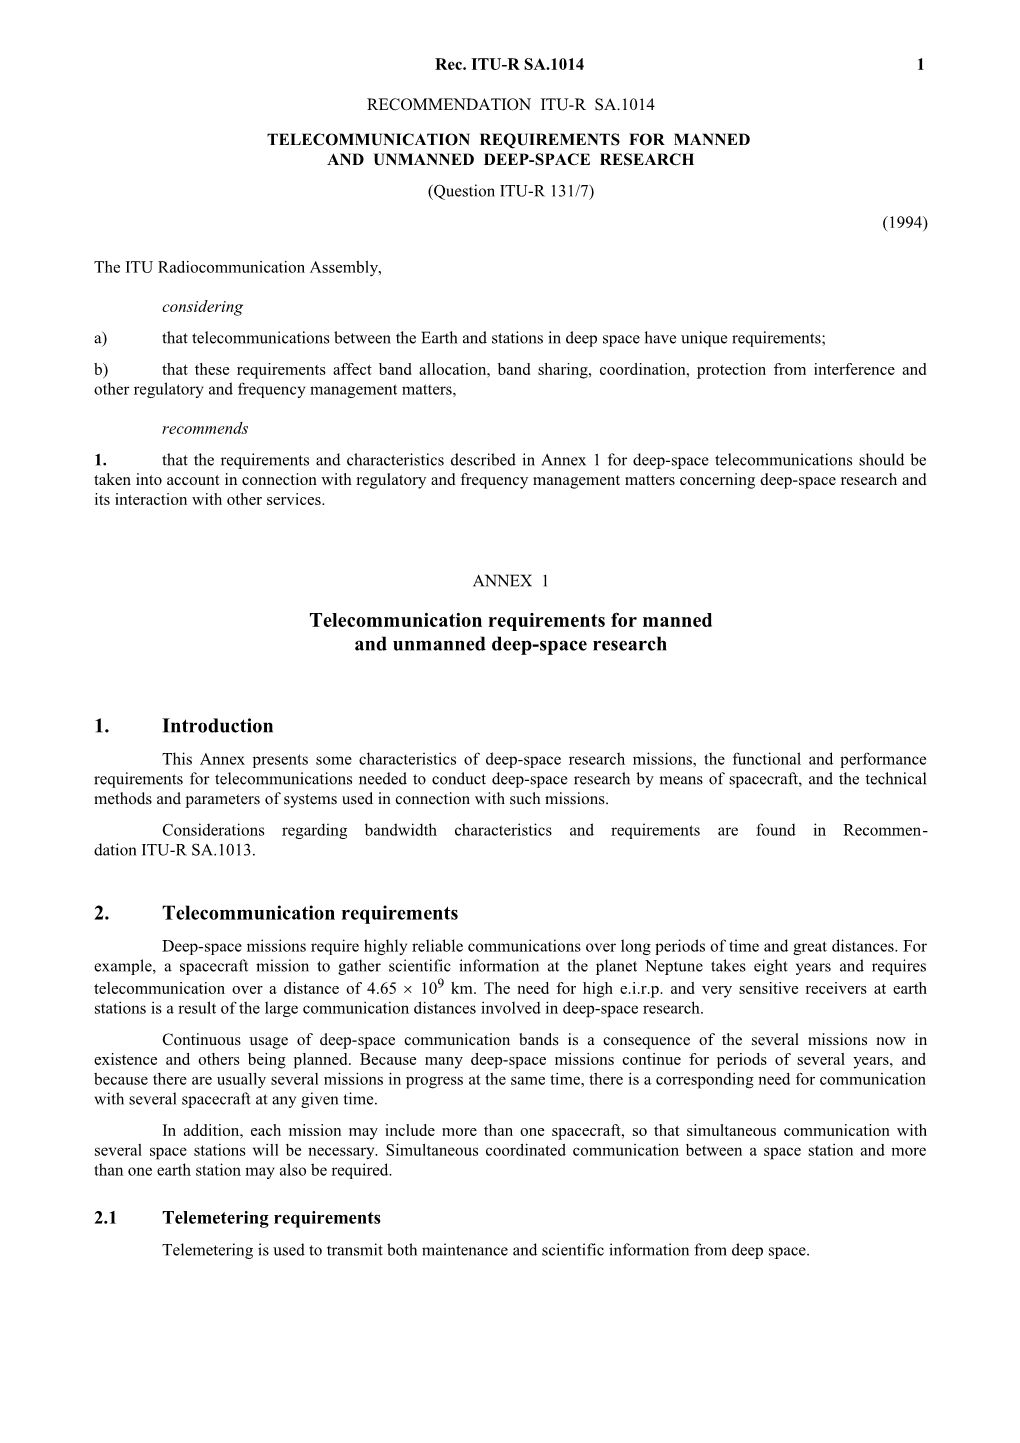 SA.1014 - Telecommunication Requirements for Manned and Unmanned Deep-Space Research